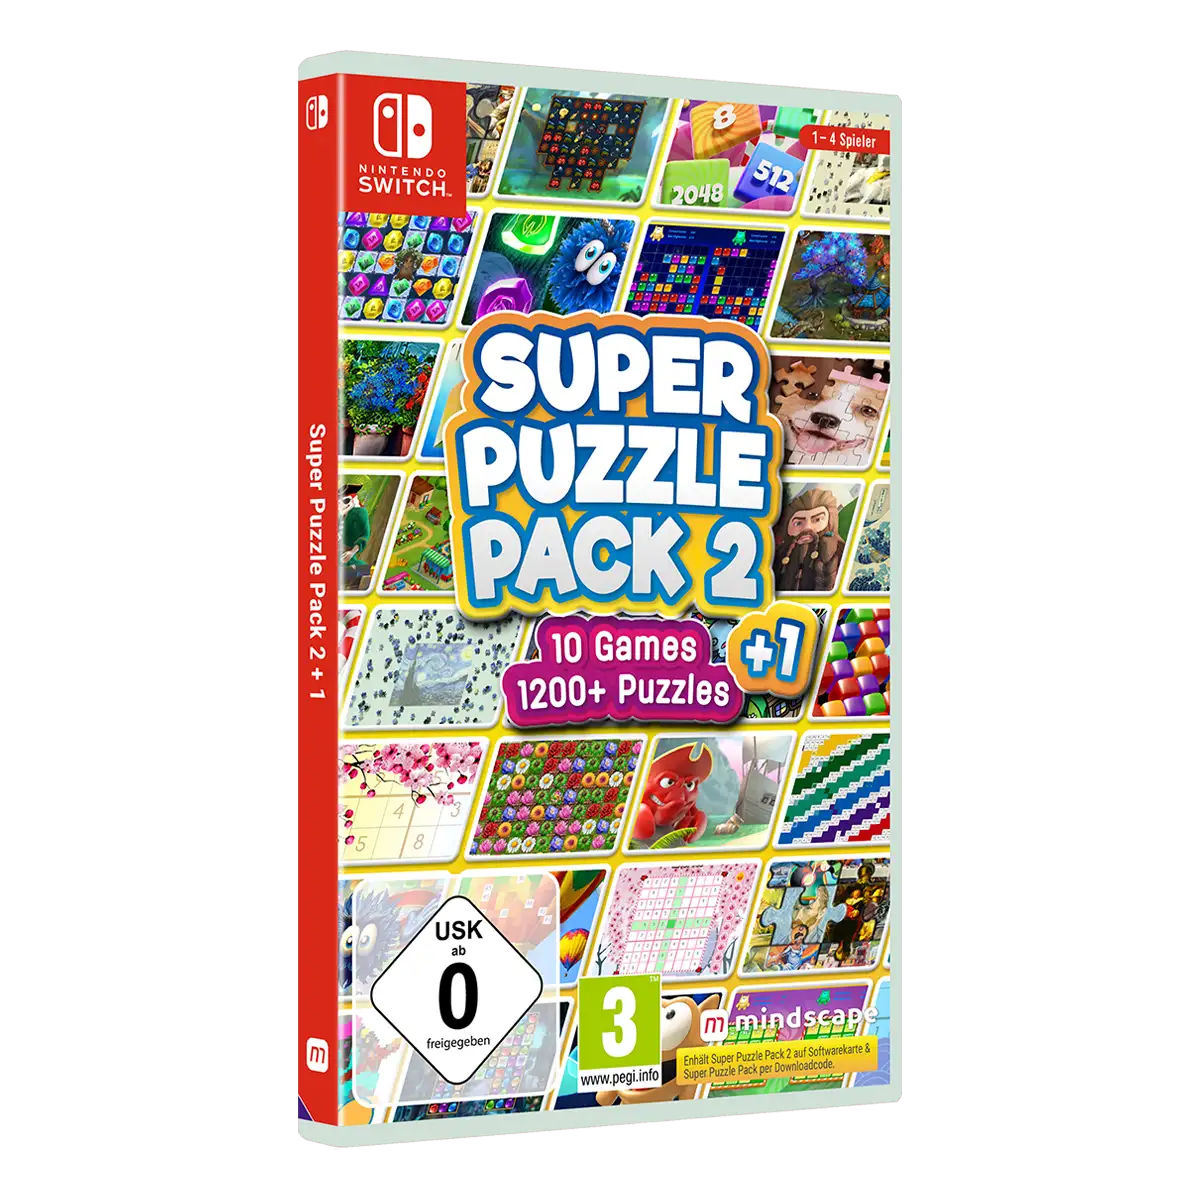 Super Puzzle Pack 2 (Switch) Image 2